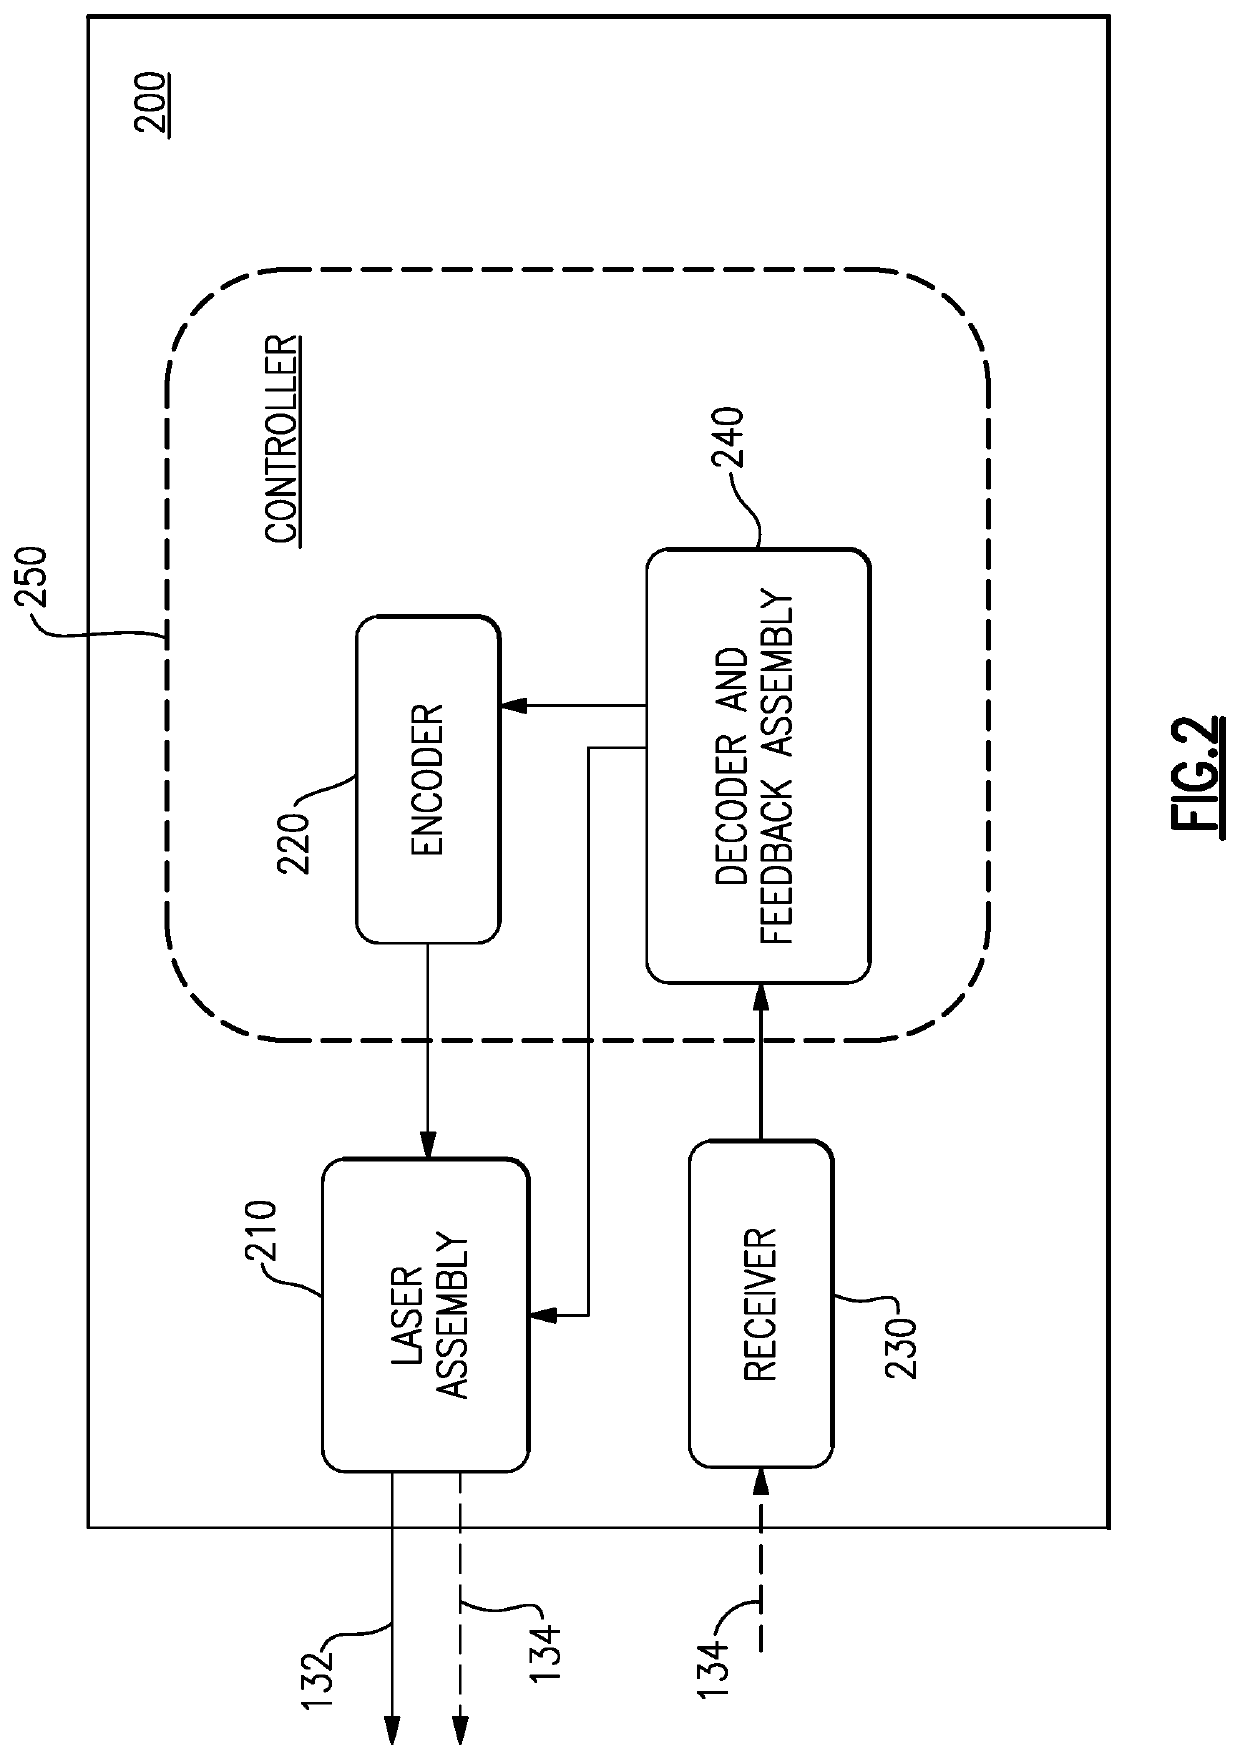 Optical to acoustic communications systems and methods